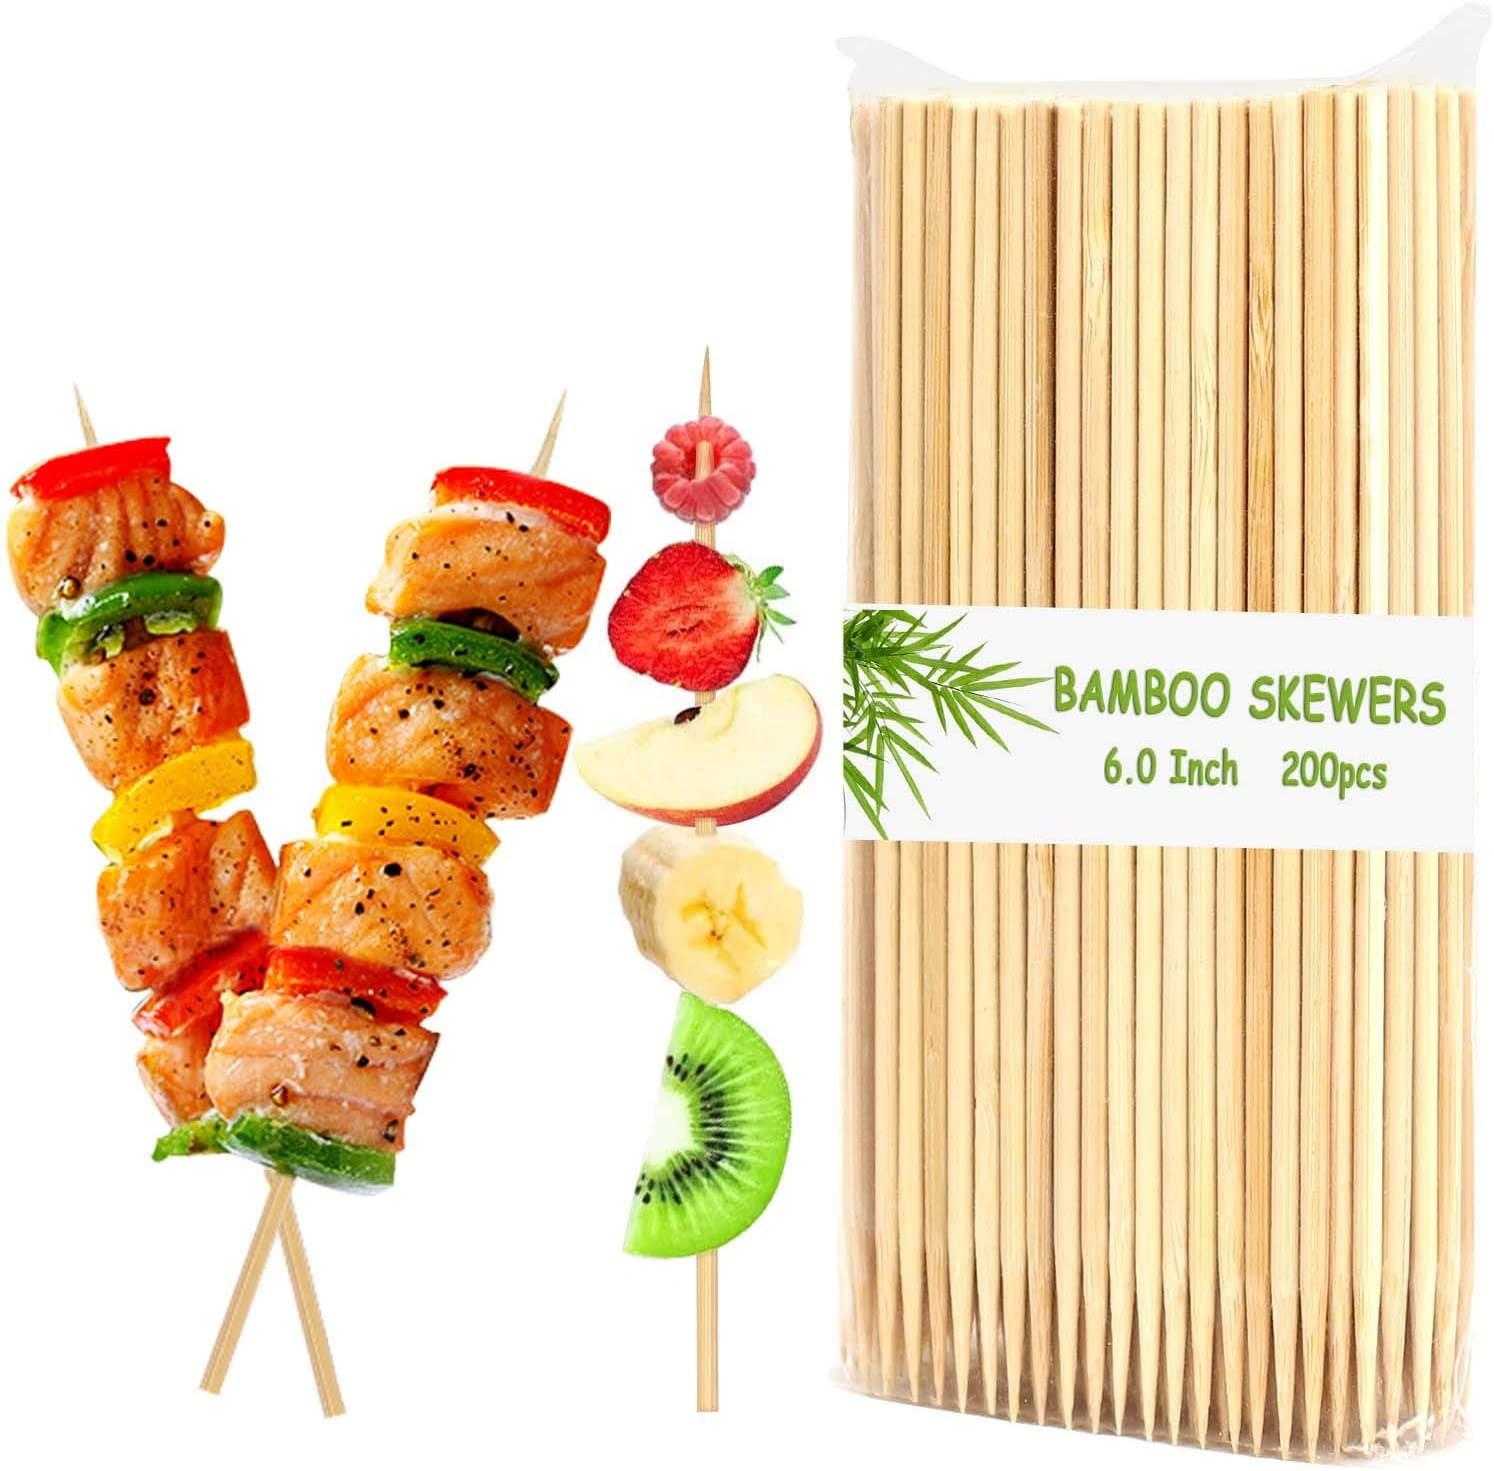 BBQ WOODEN BAMBOO SKEWERS VERY STRONG & LONG 38CM - 15 INCHES 